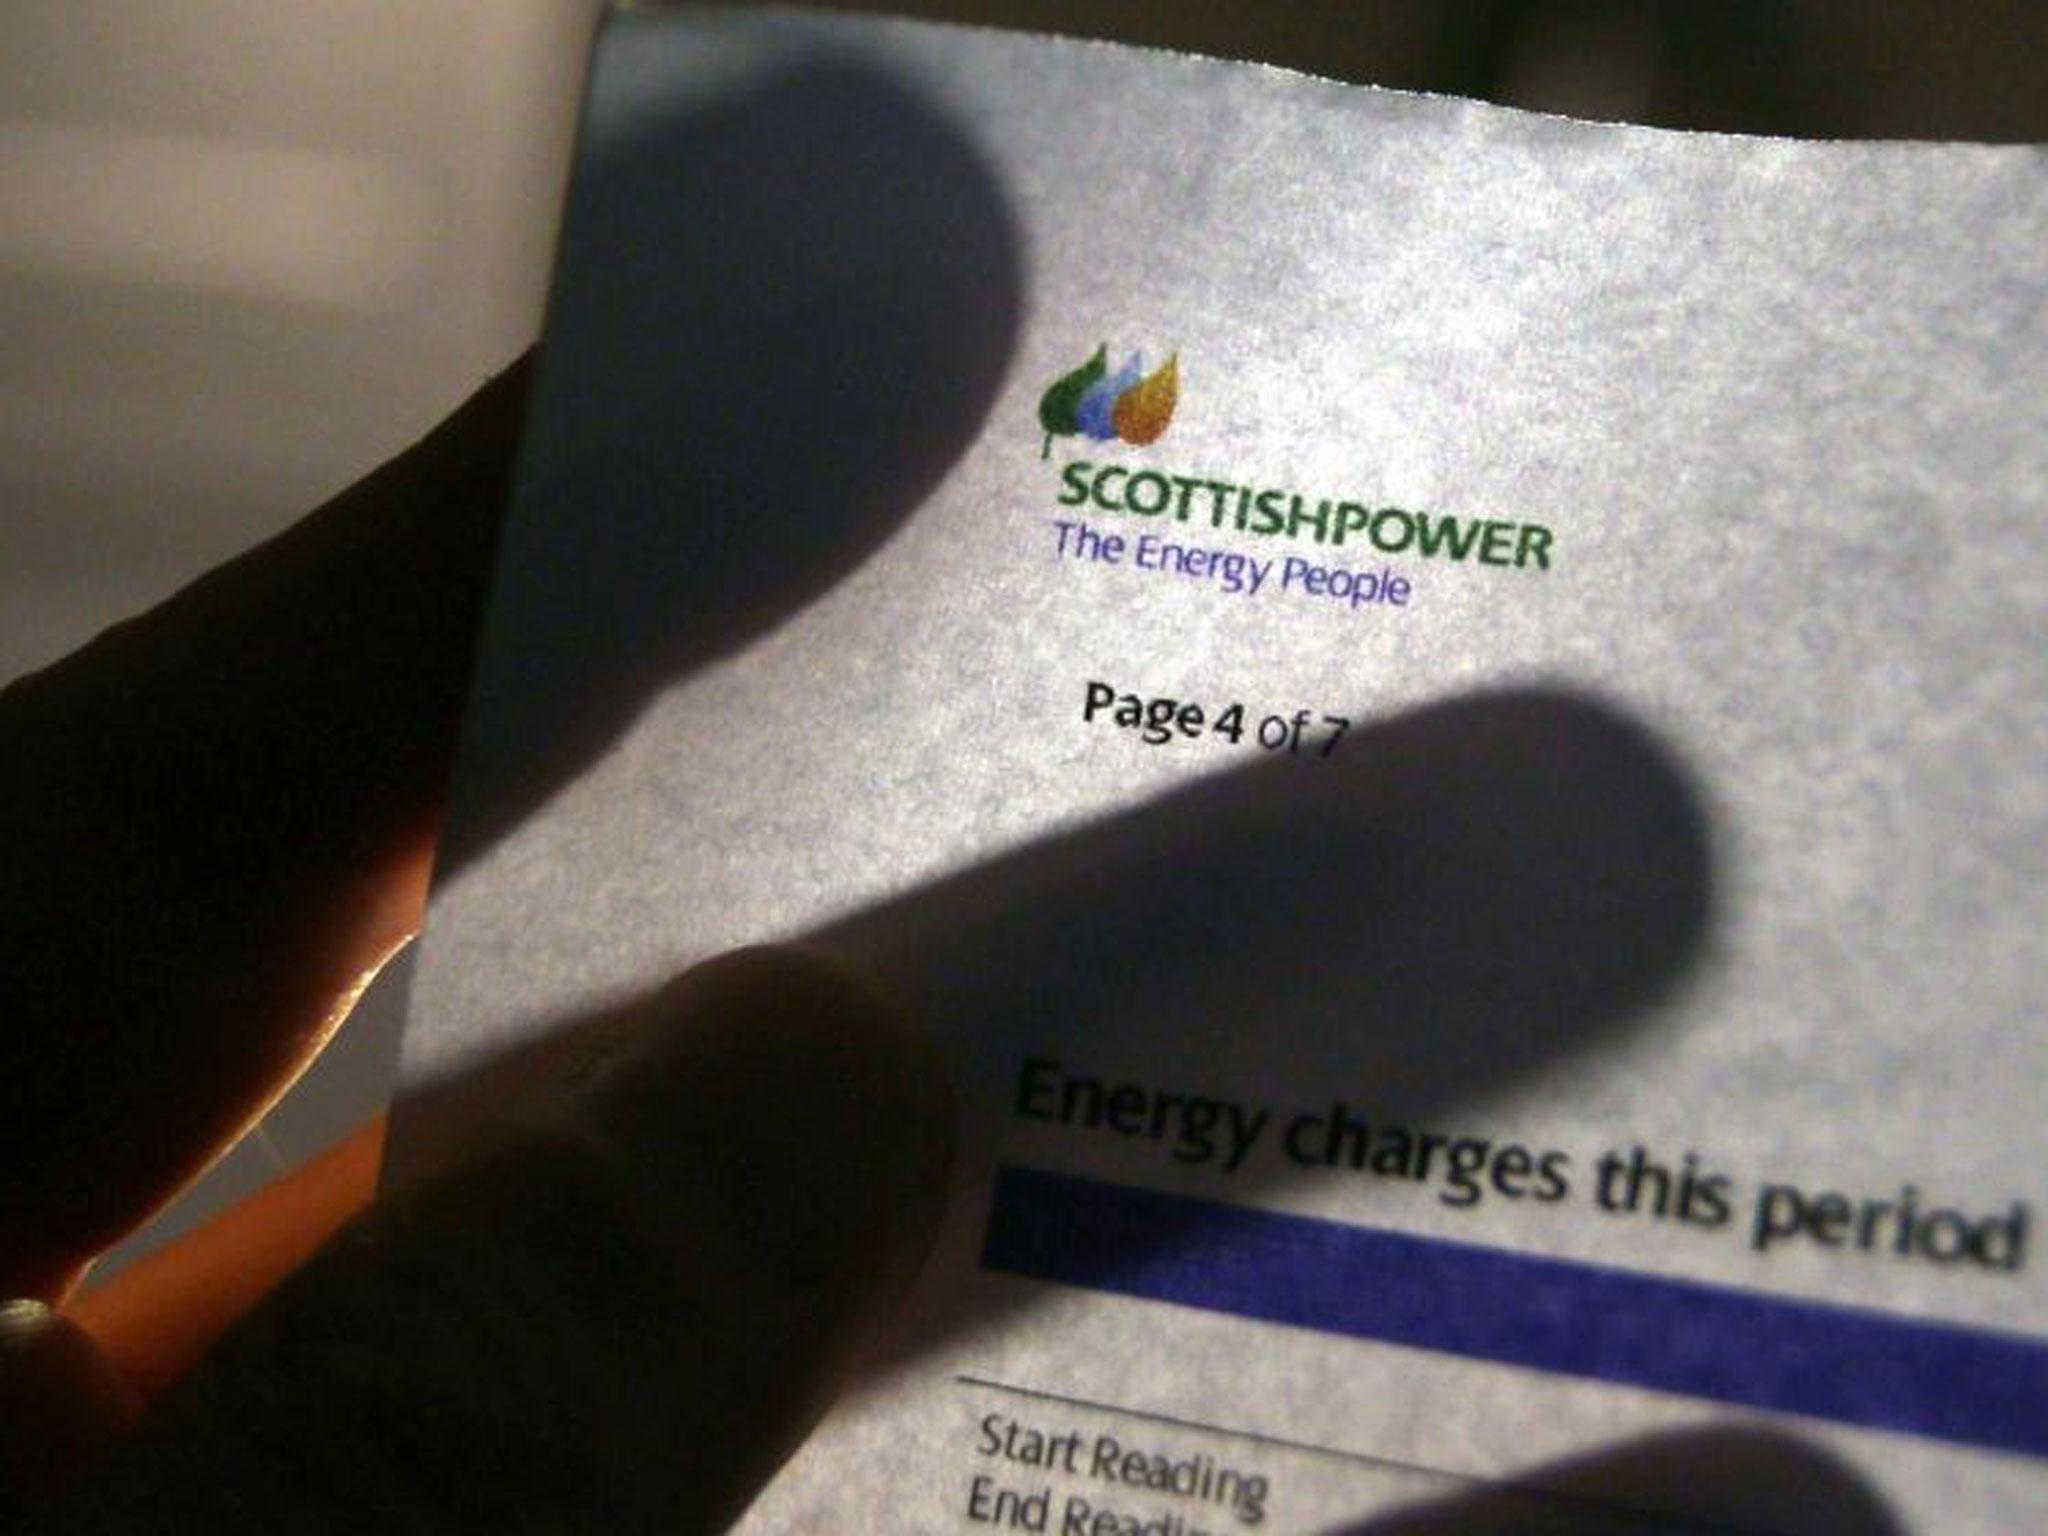 Scottish Power was found to have unacceptably long call waiting times